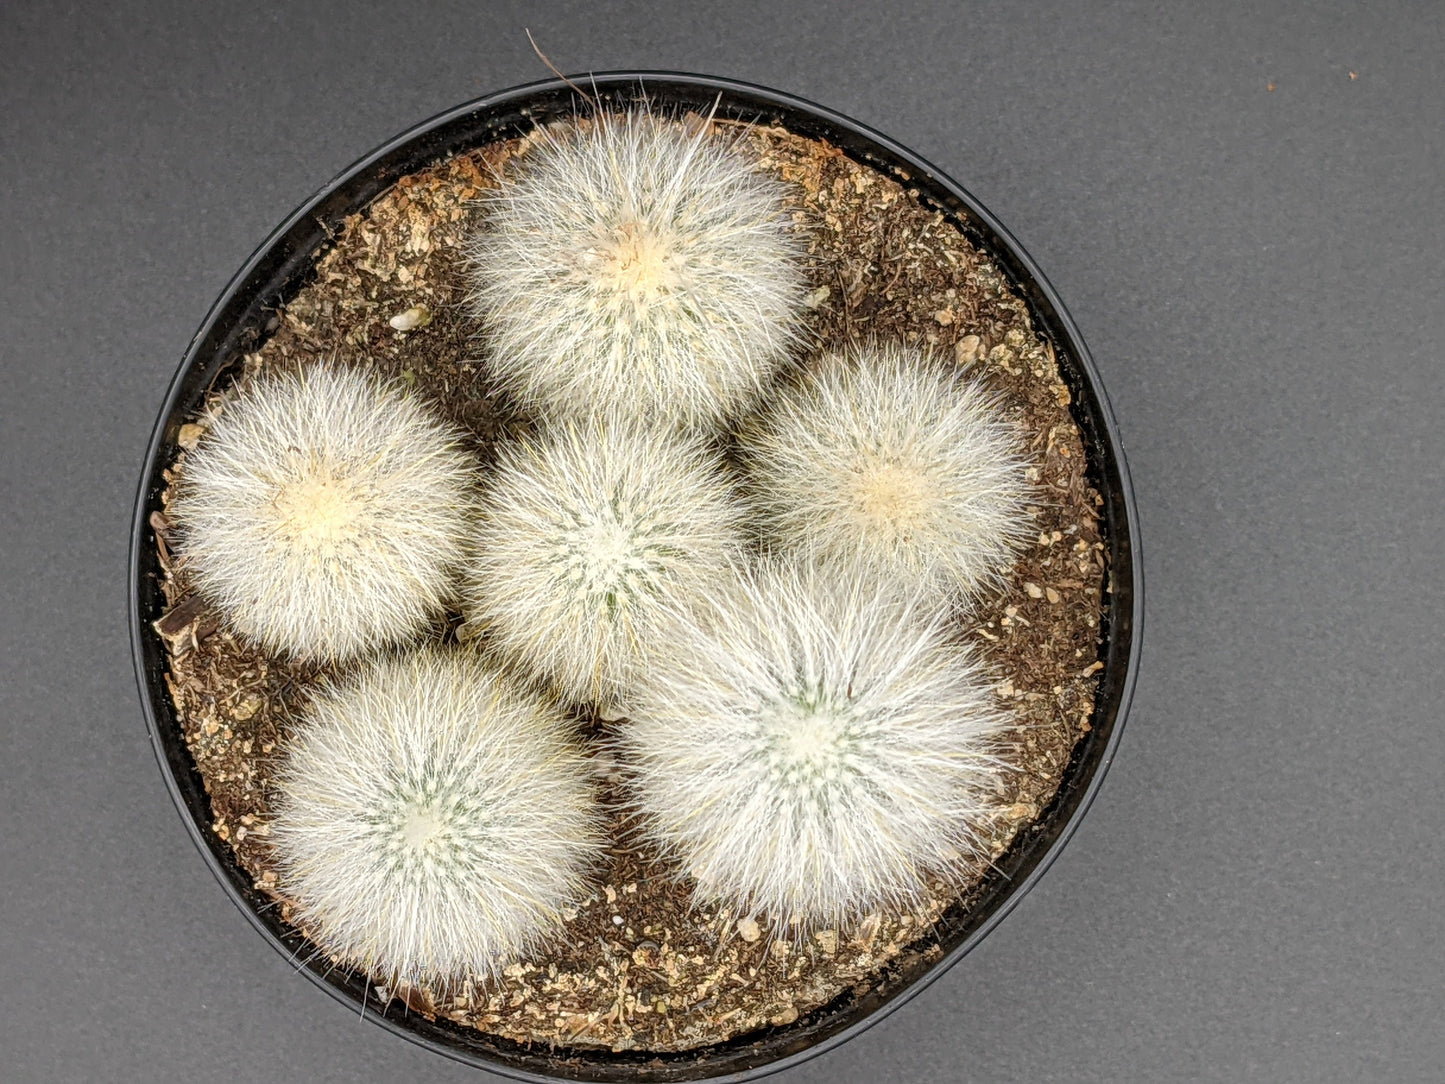 Fuzzy Silver Torch - Cleistocactus Strausii Cactus -  Fuzzy Wooly Torch - Old Man Cactus - Baby Size Few Inches